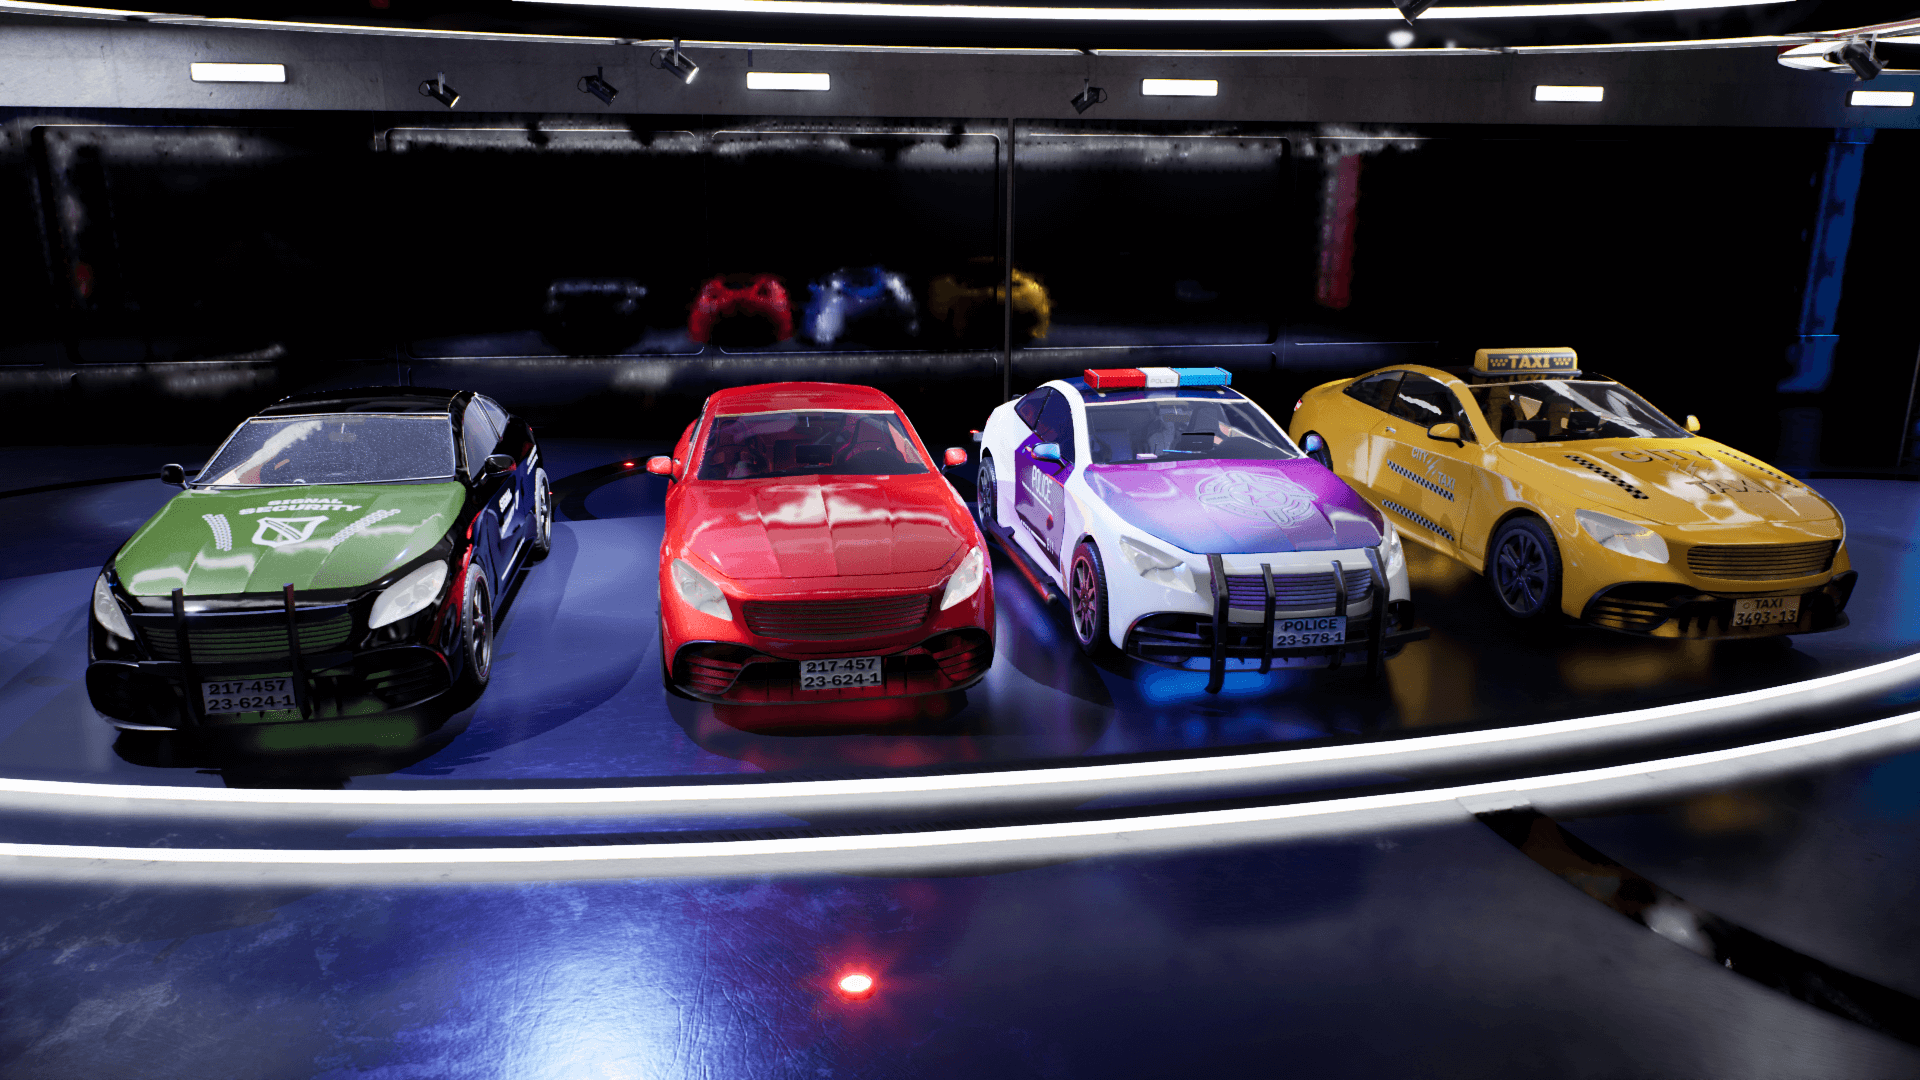 An image showing the Sedan Bundle asset pack, created with Unreal Engine